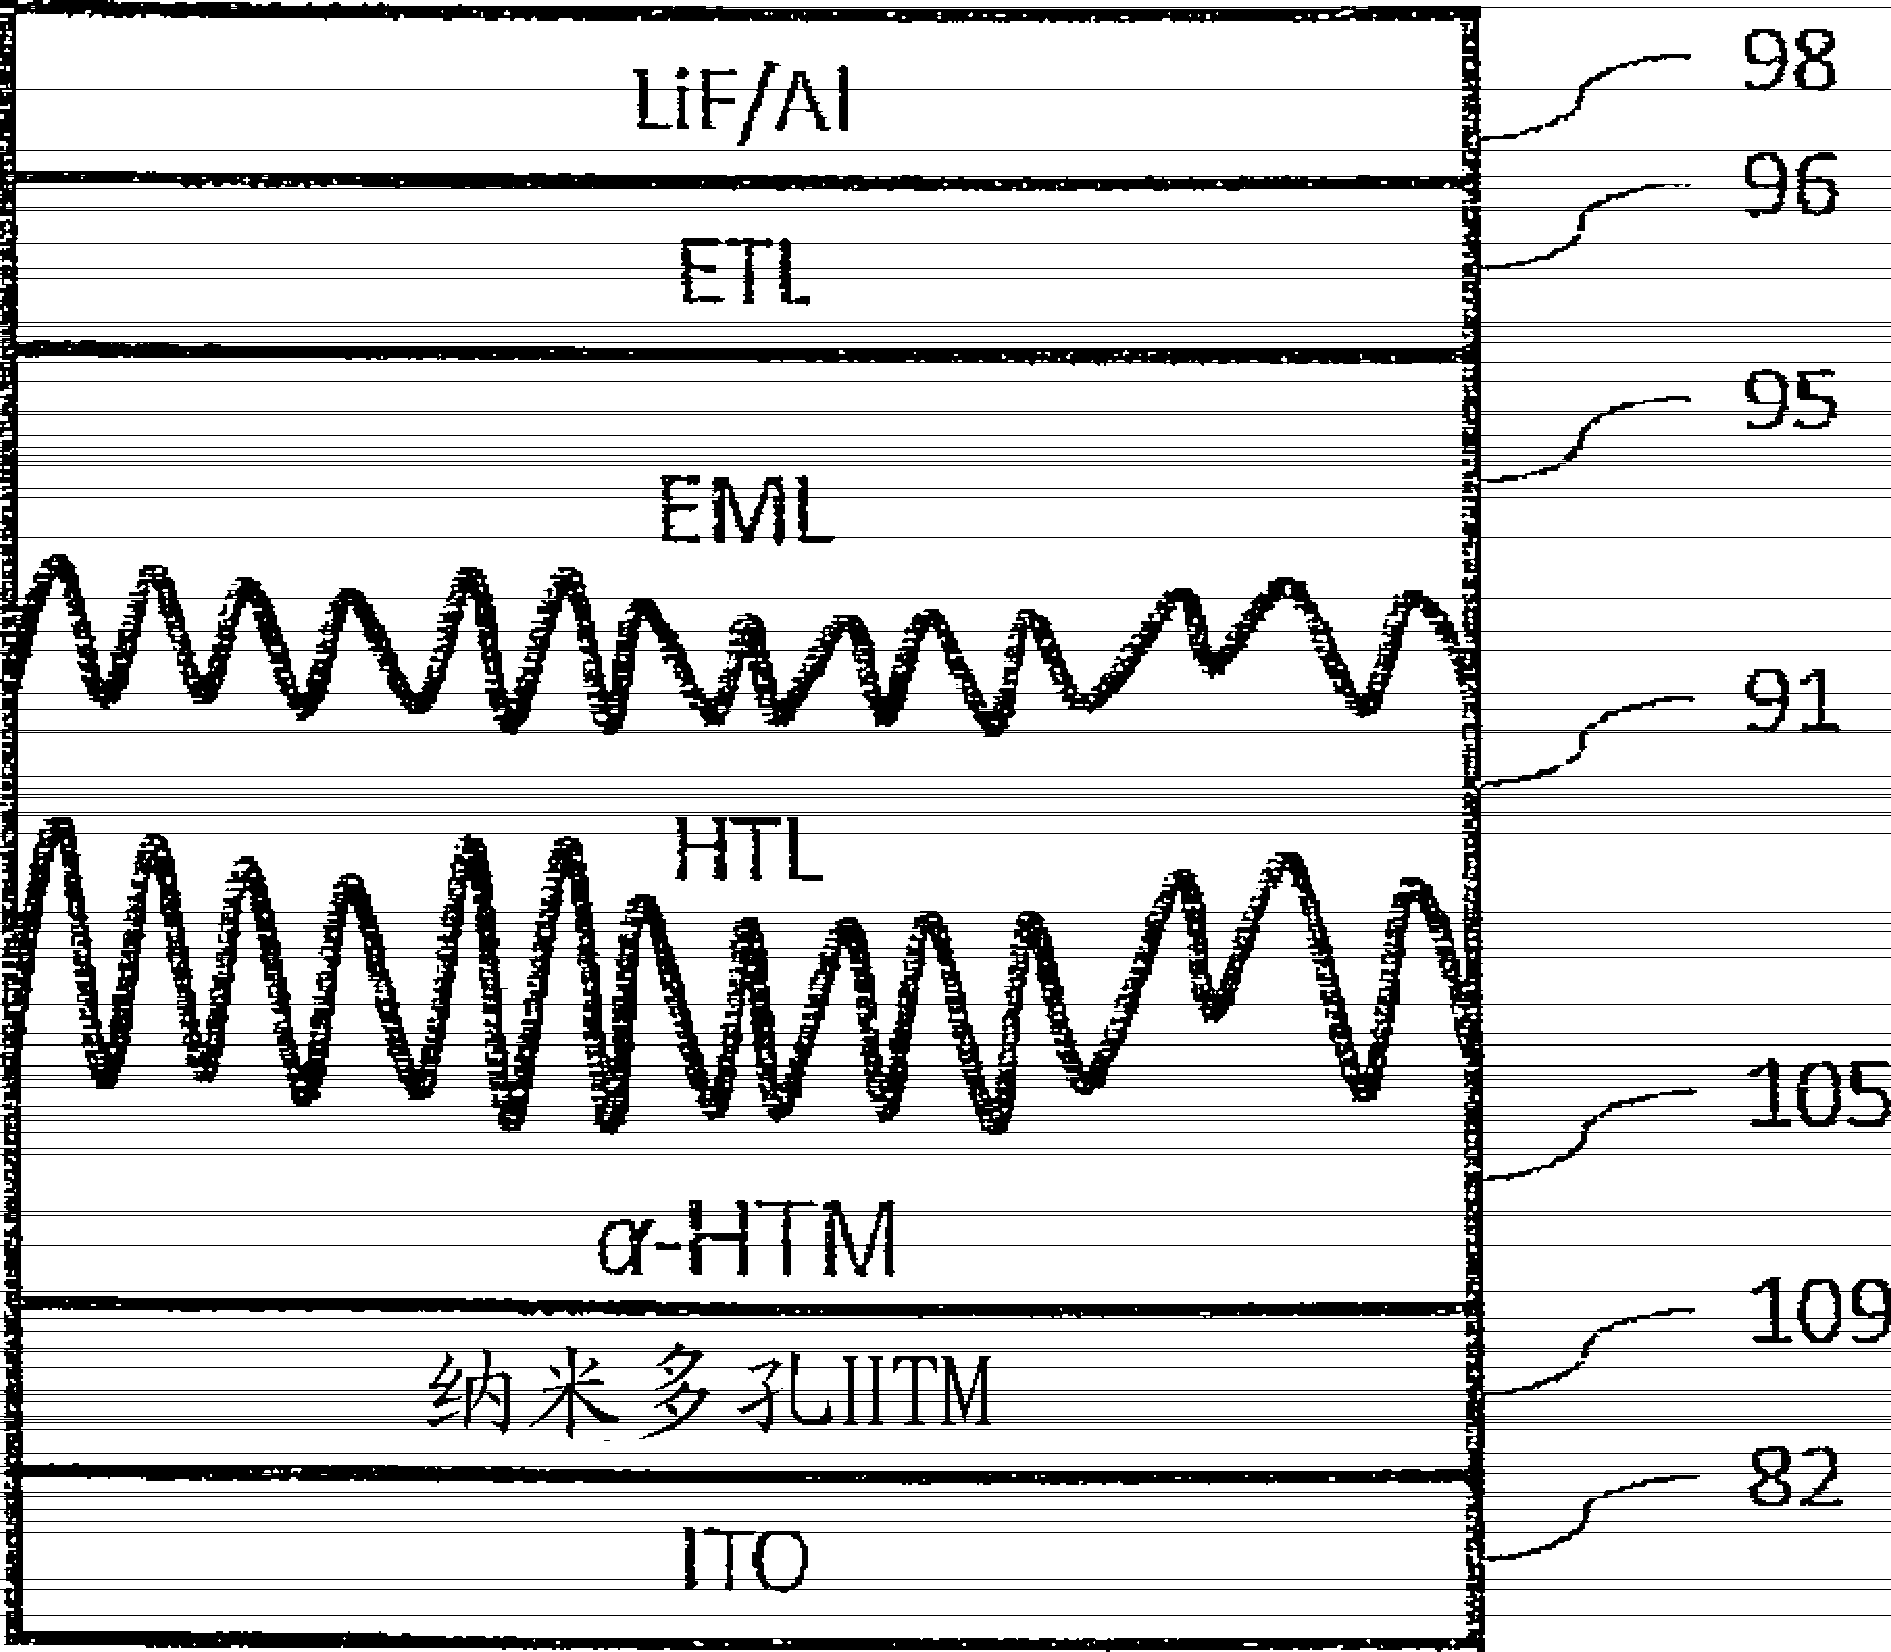 Materials and methods for OLED microcavities and buffer layers